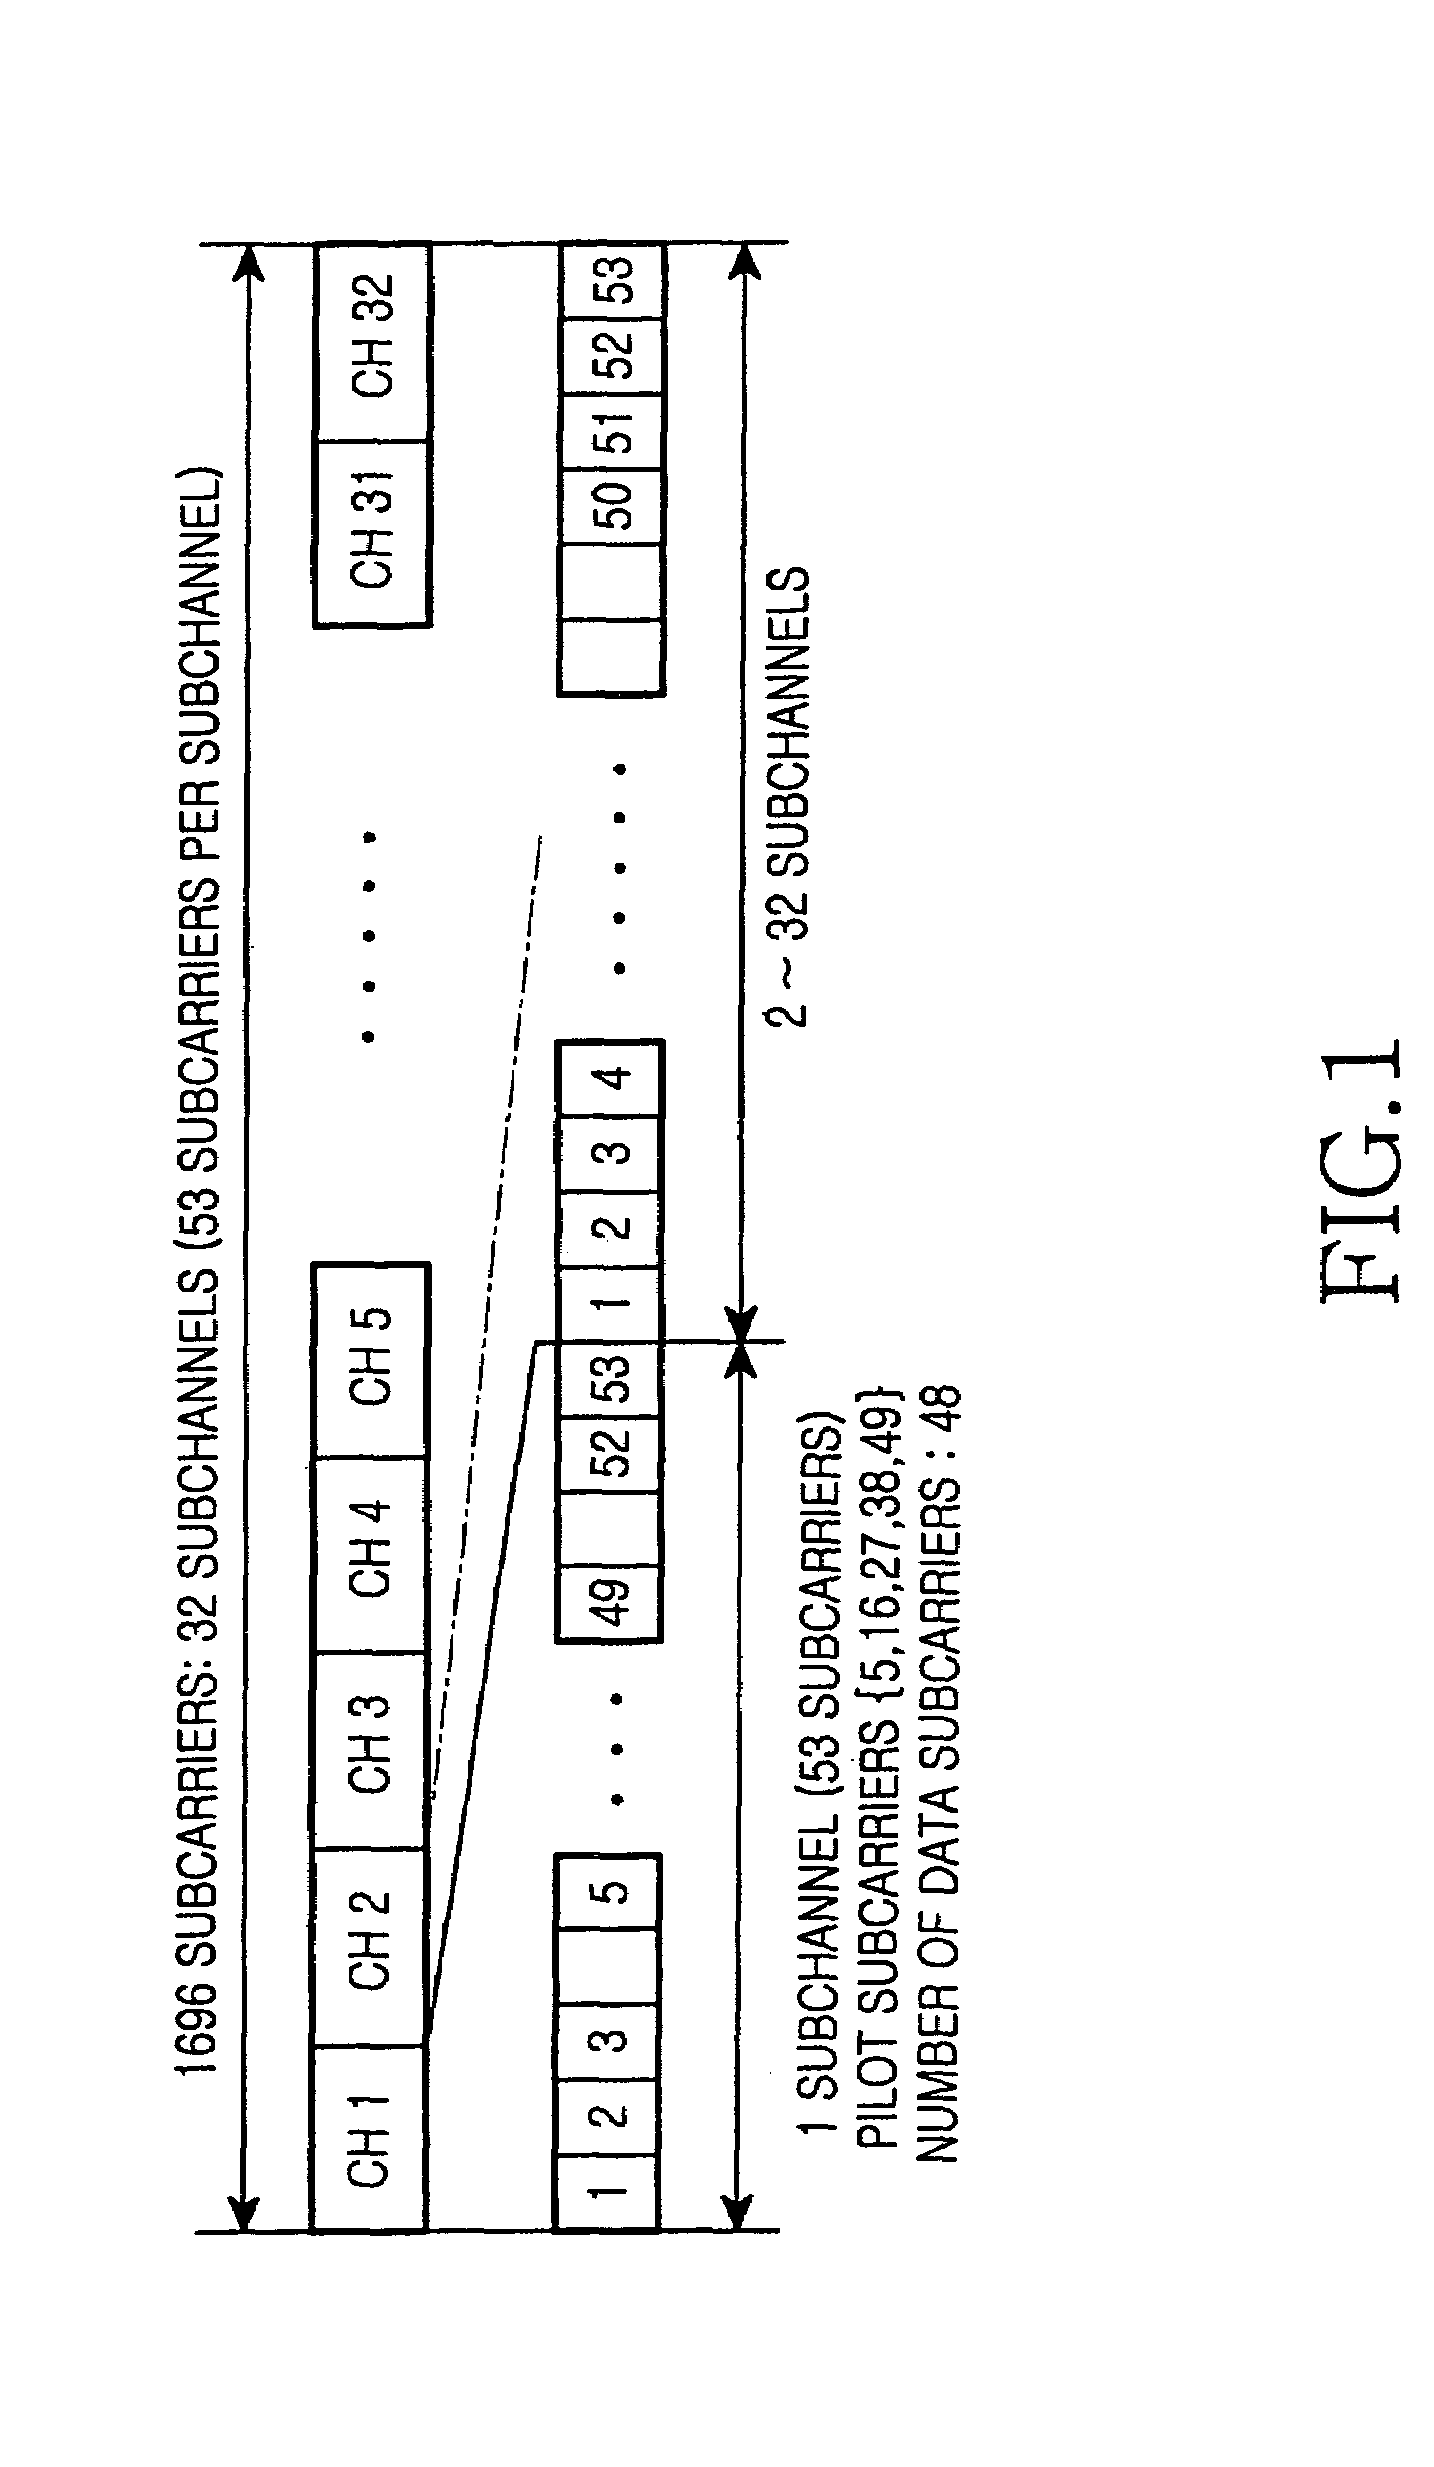 Method and apparatus for scheduling downlink channels in an orthogonal frequency division multiple access system and a system using the same